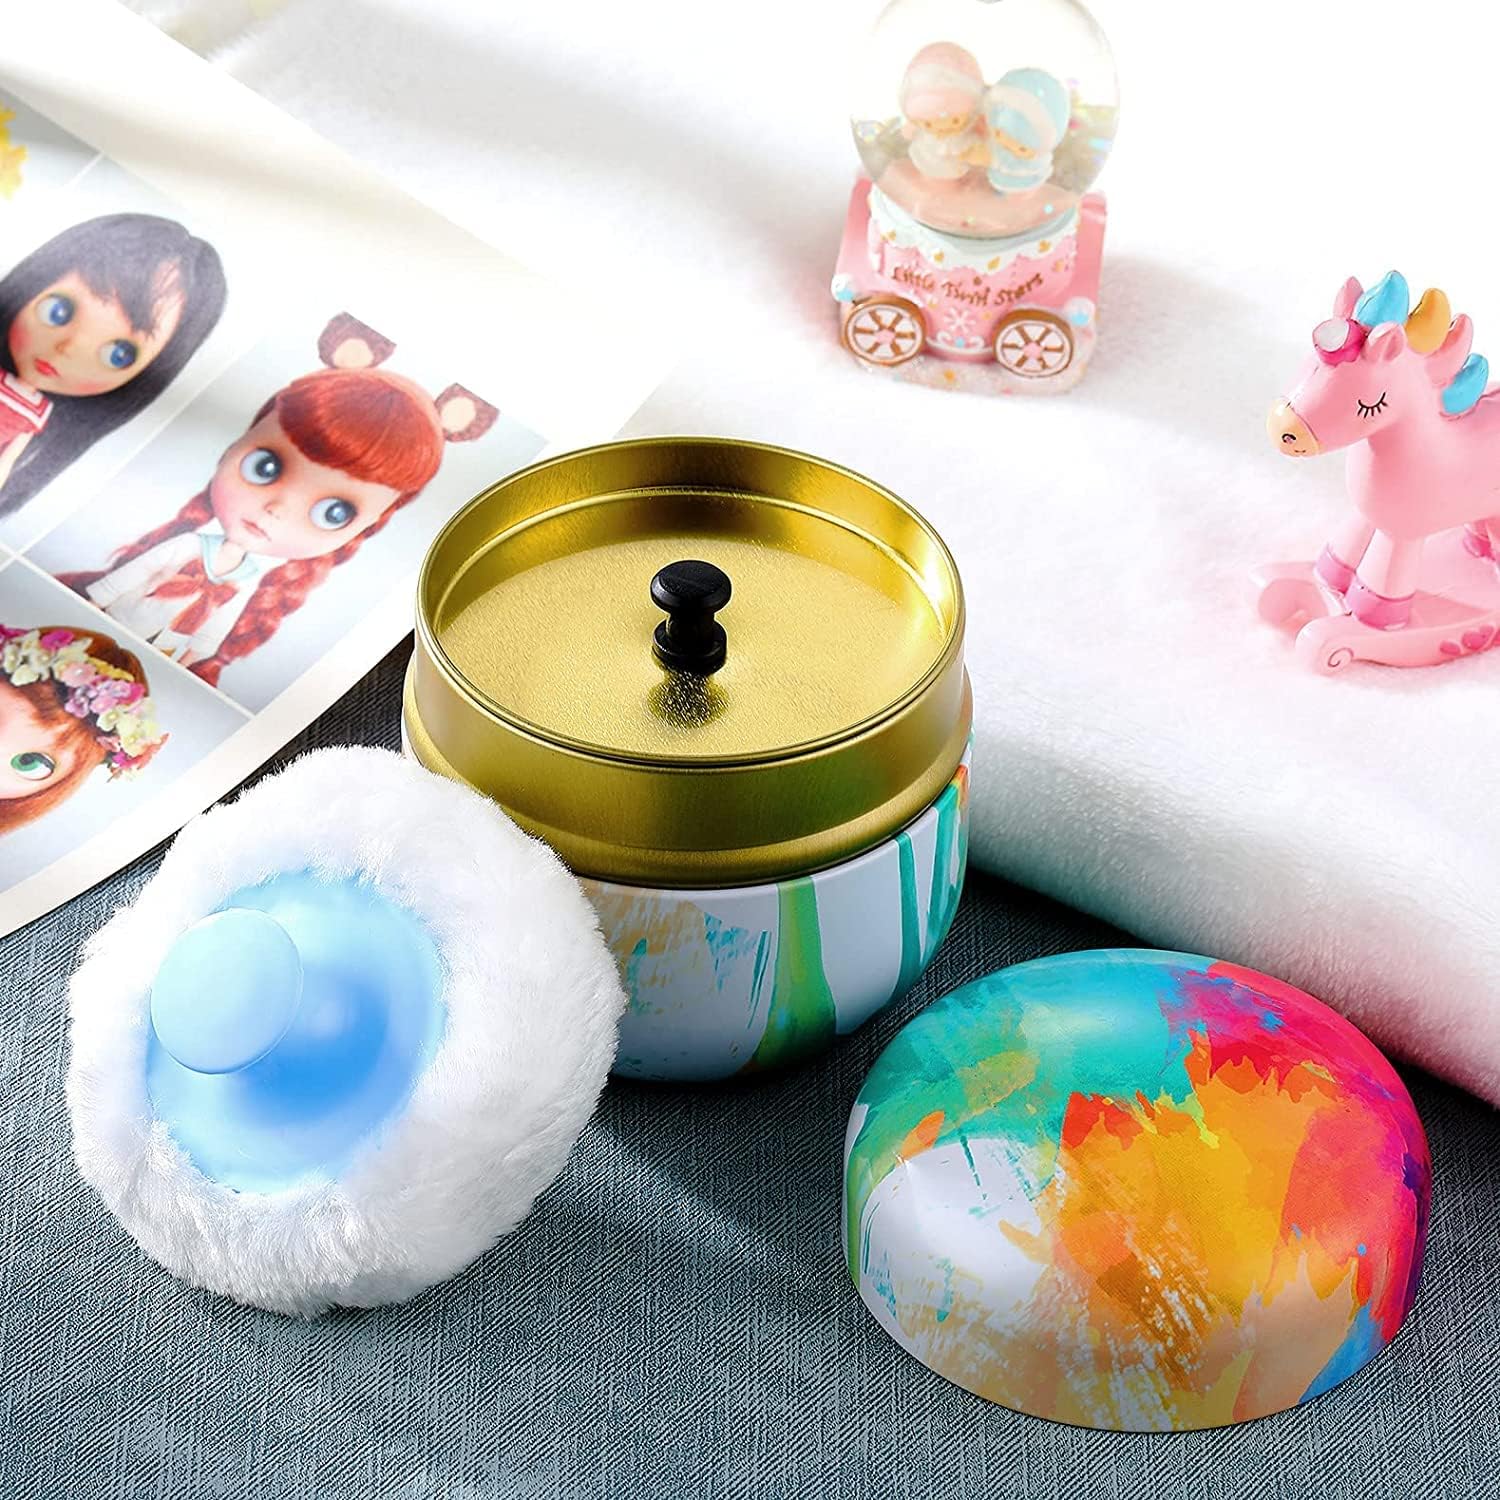 Body Powder Powder Case with Powder Puff Powder Container Tea Canister for Baby and Adult Body Talcum Powder Tea Box (Colorful Flower)